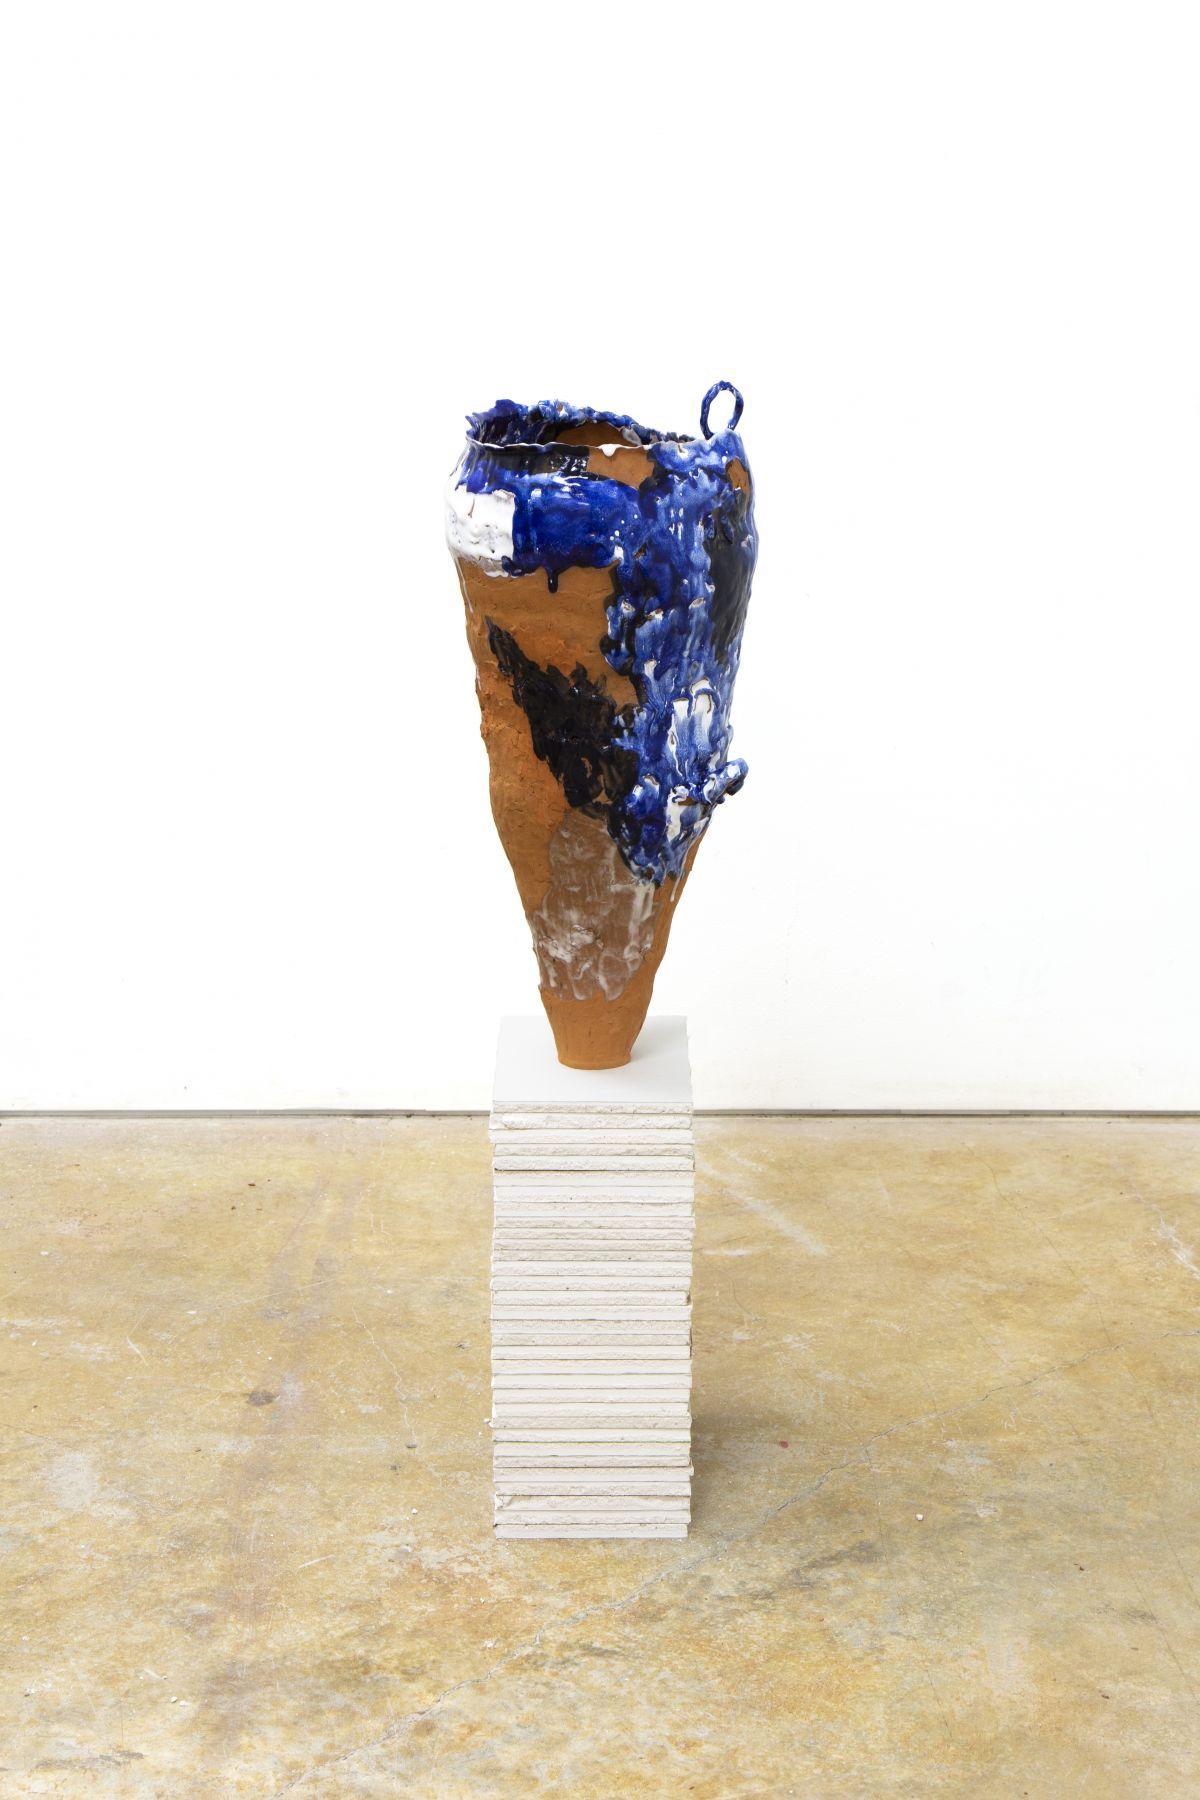 Sam Mack Abstract Sculpture - Untitled (water, lows, and blue)